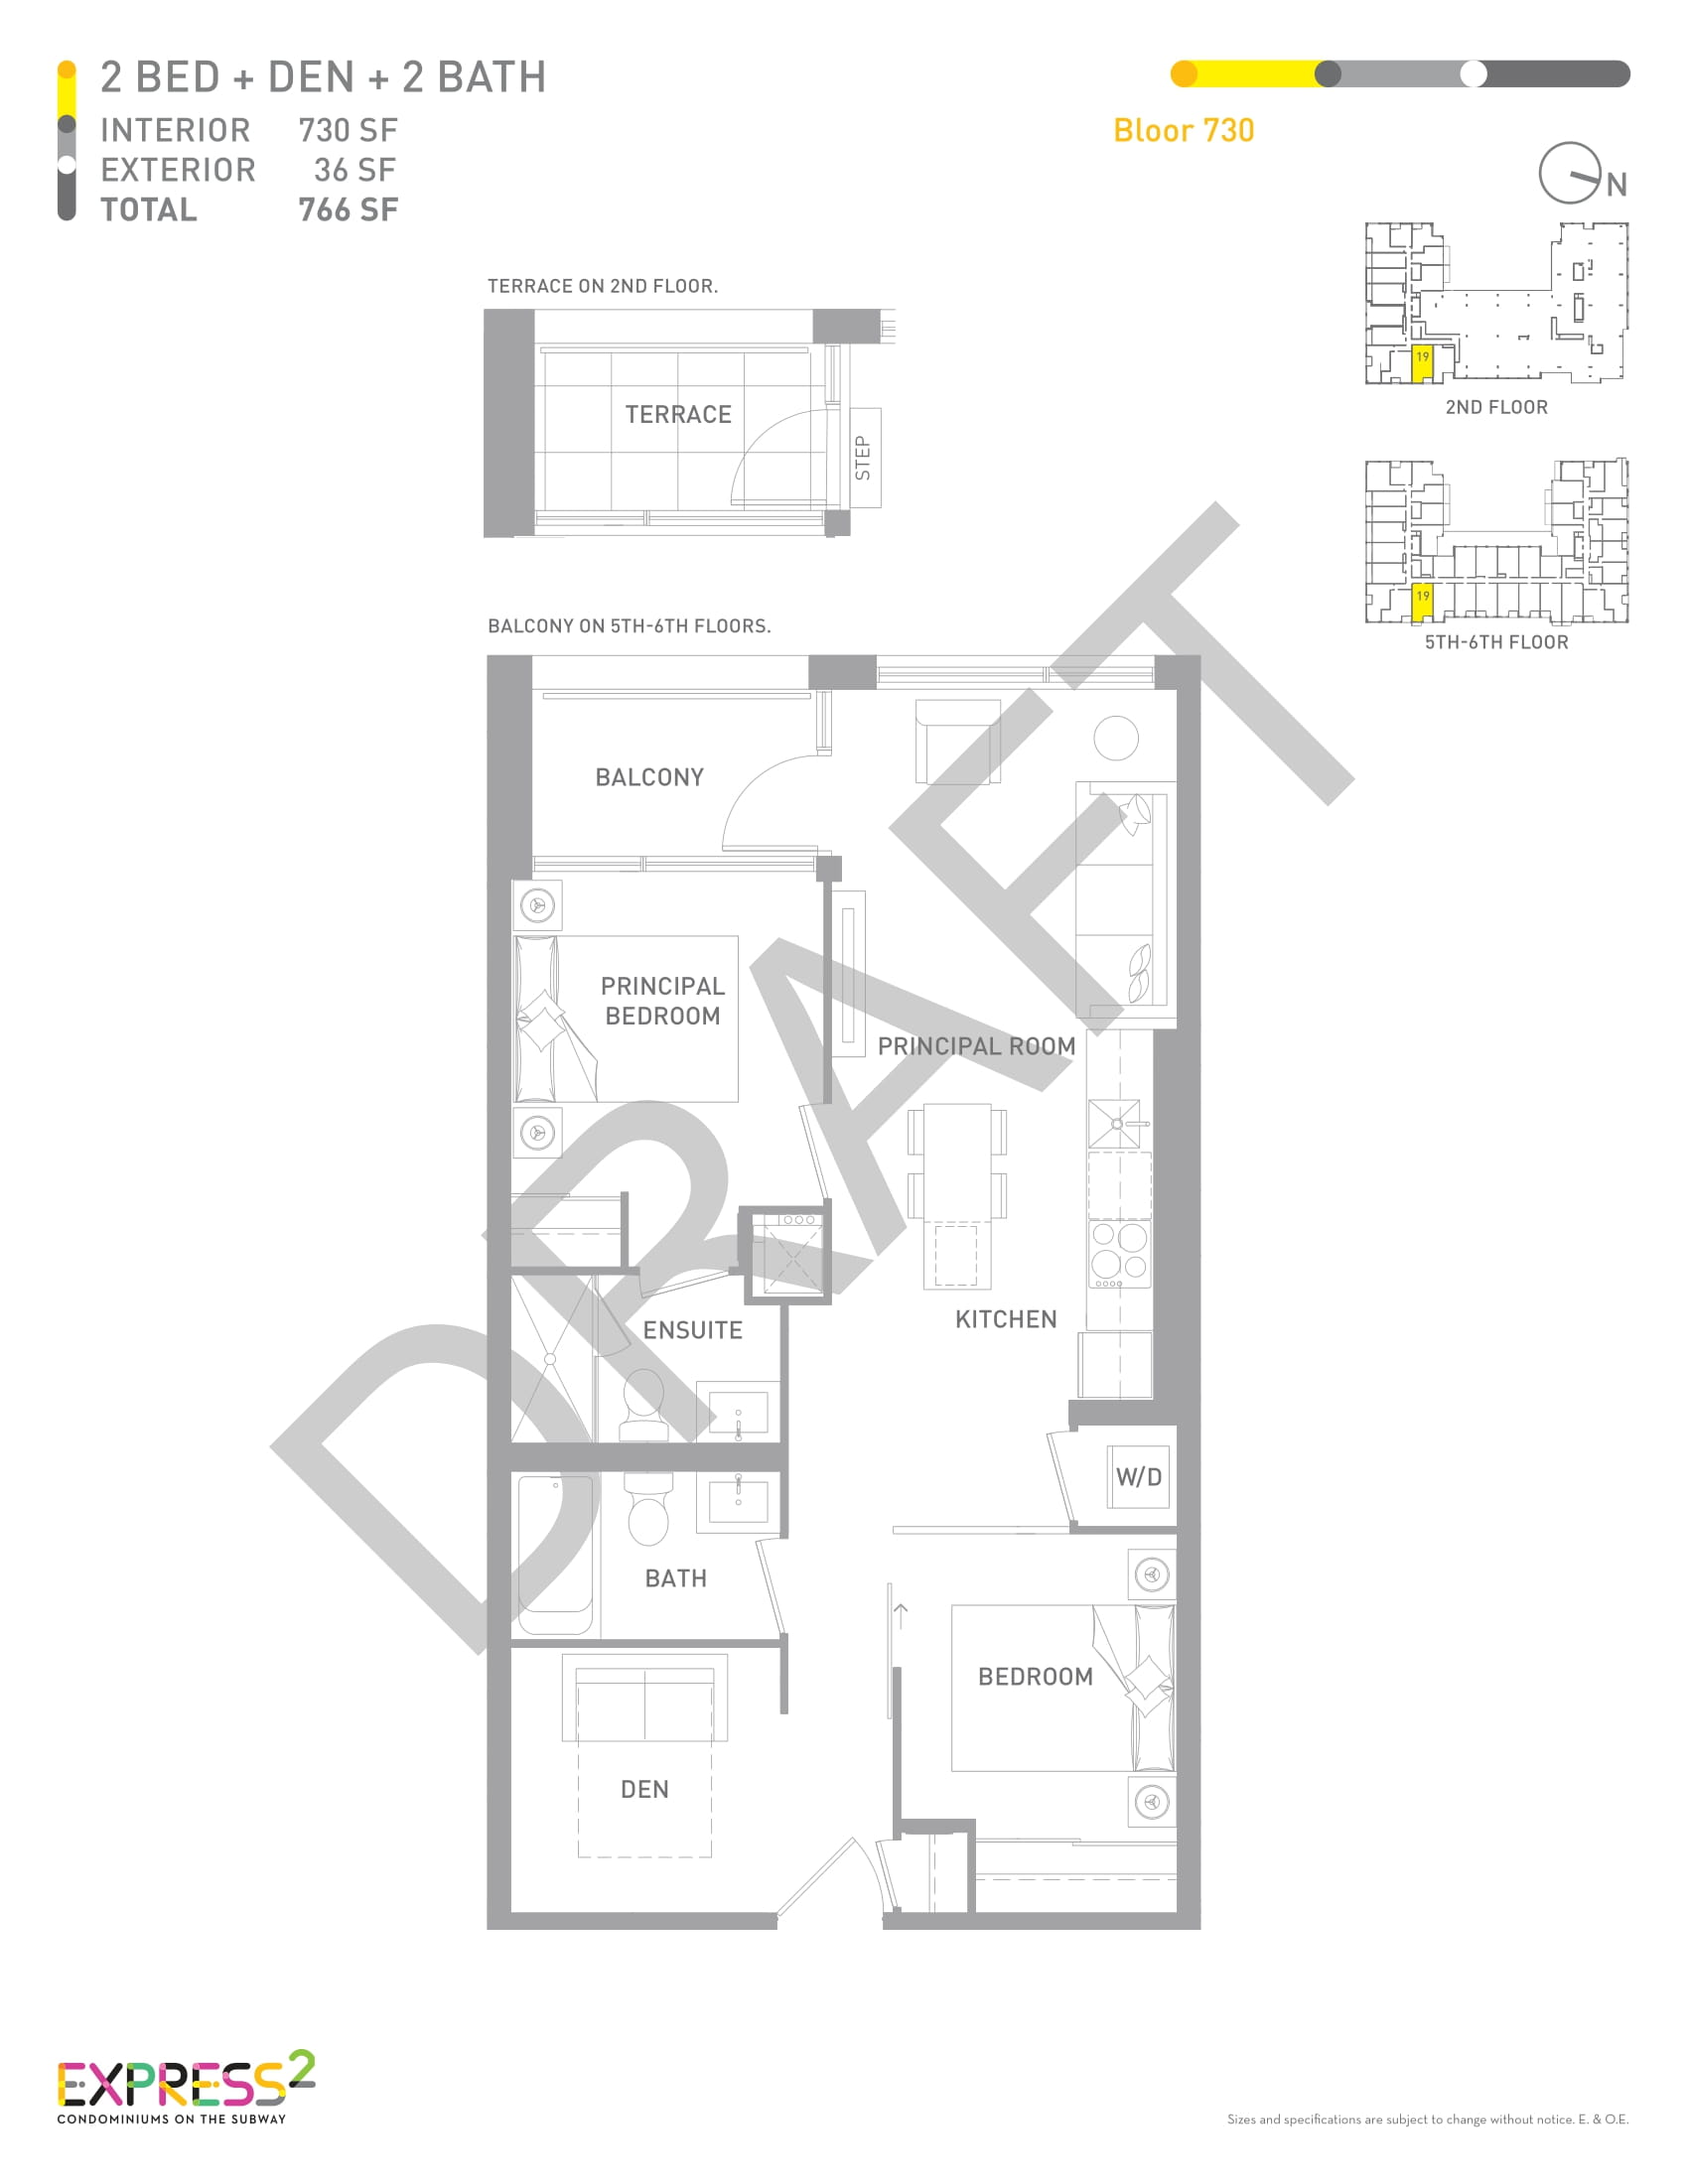 Express 2 Preview Floor Plans-12